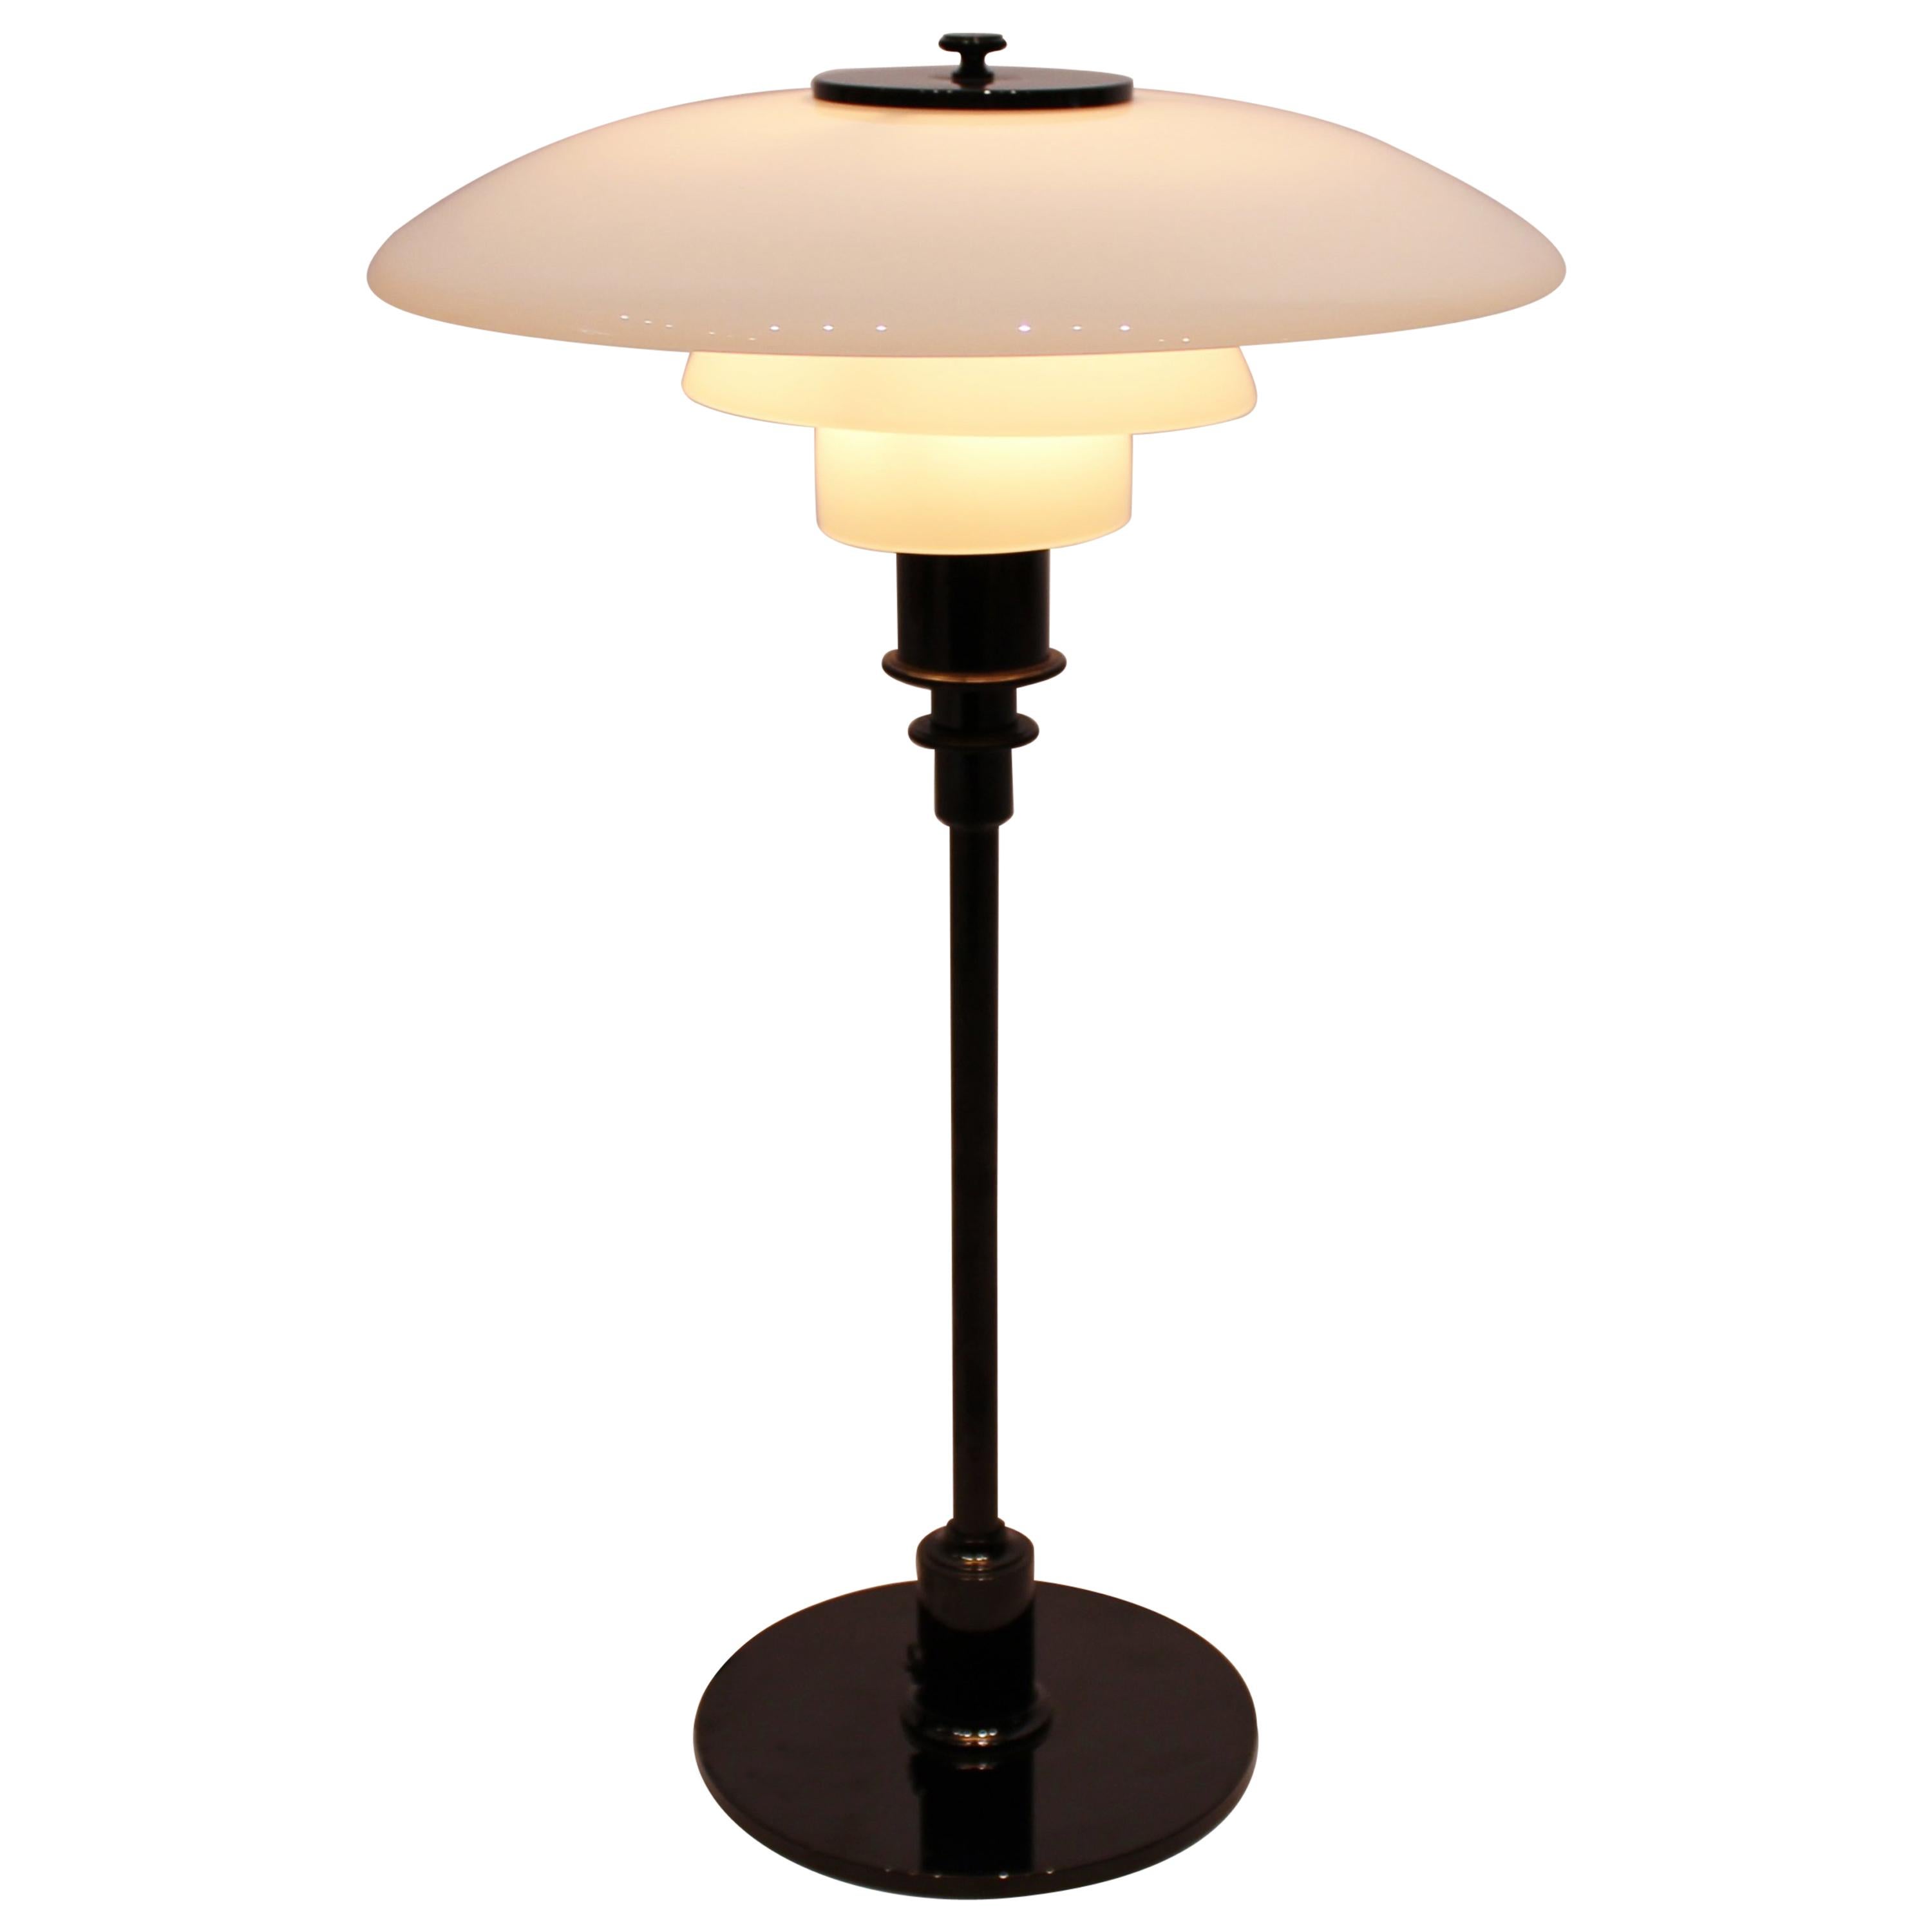 Table Lamp, Model 3/2, with Black Frame and Opaline Glass, by Poul Henningsen